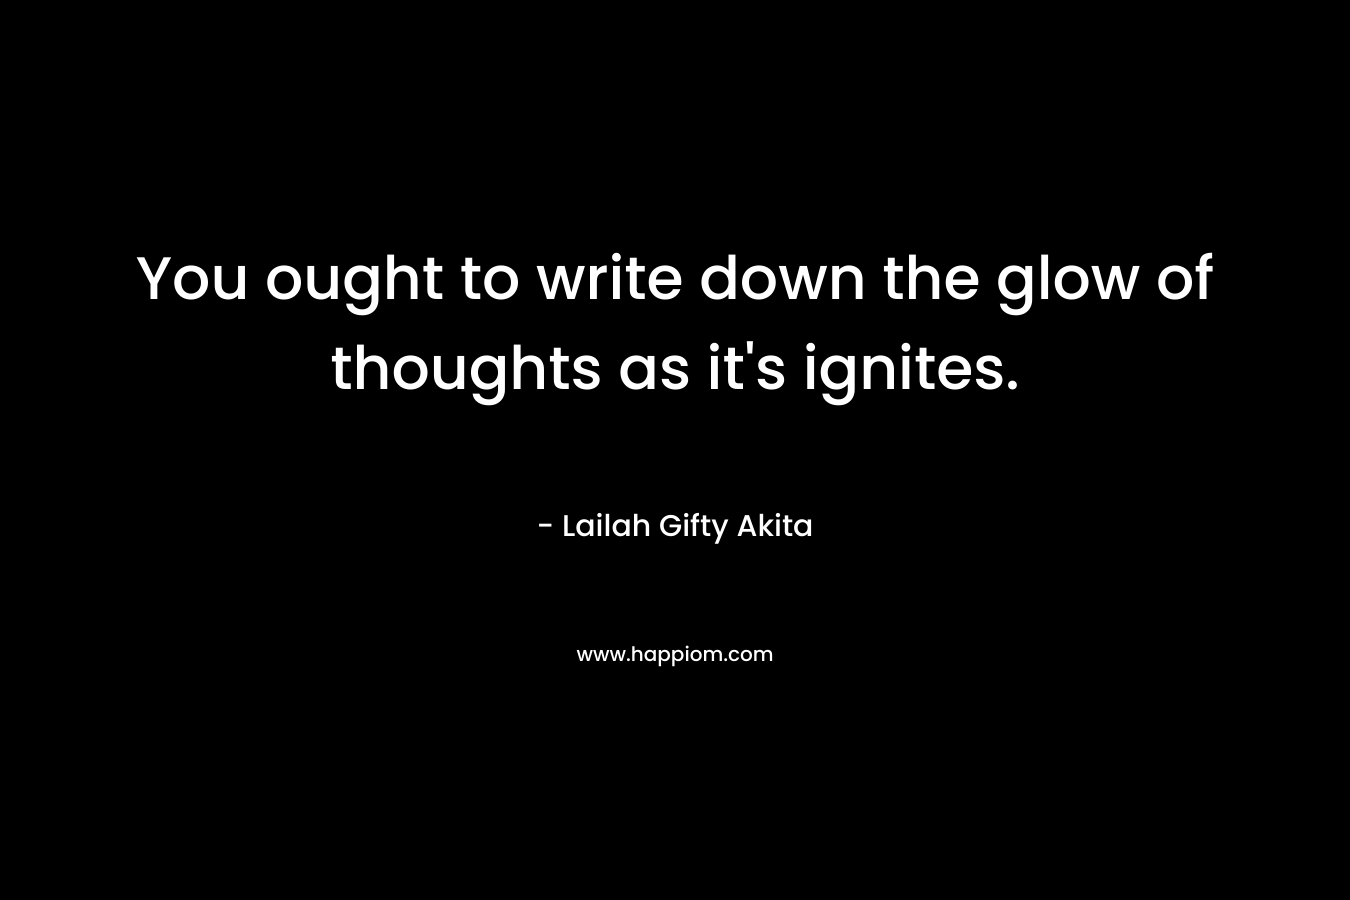 You ought to write down the glow of thoughts as it's ignites.